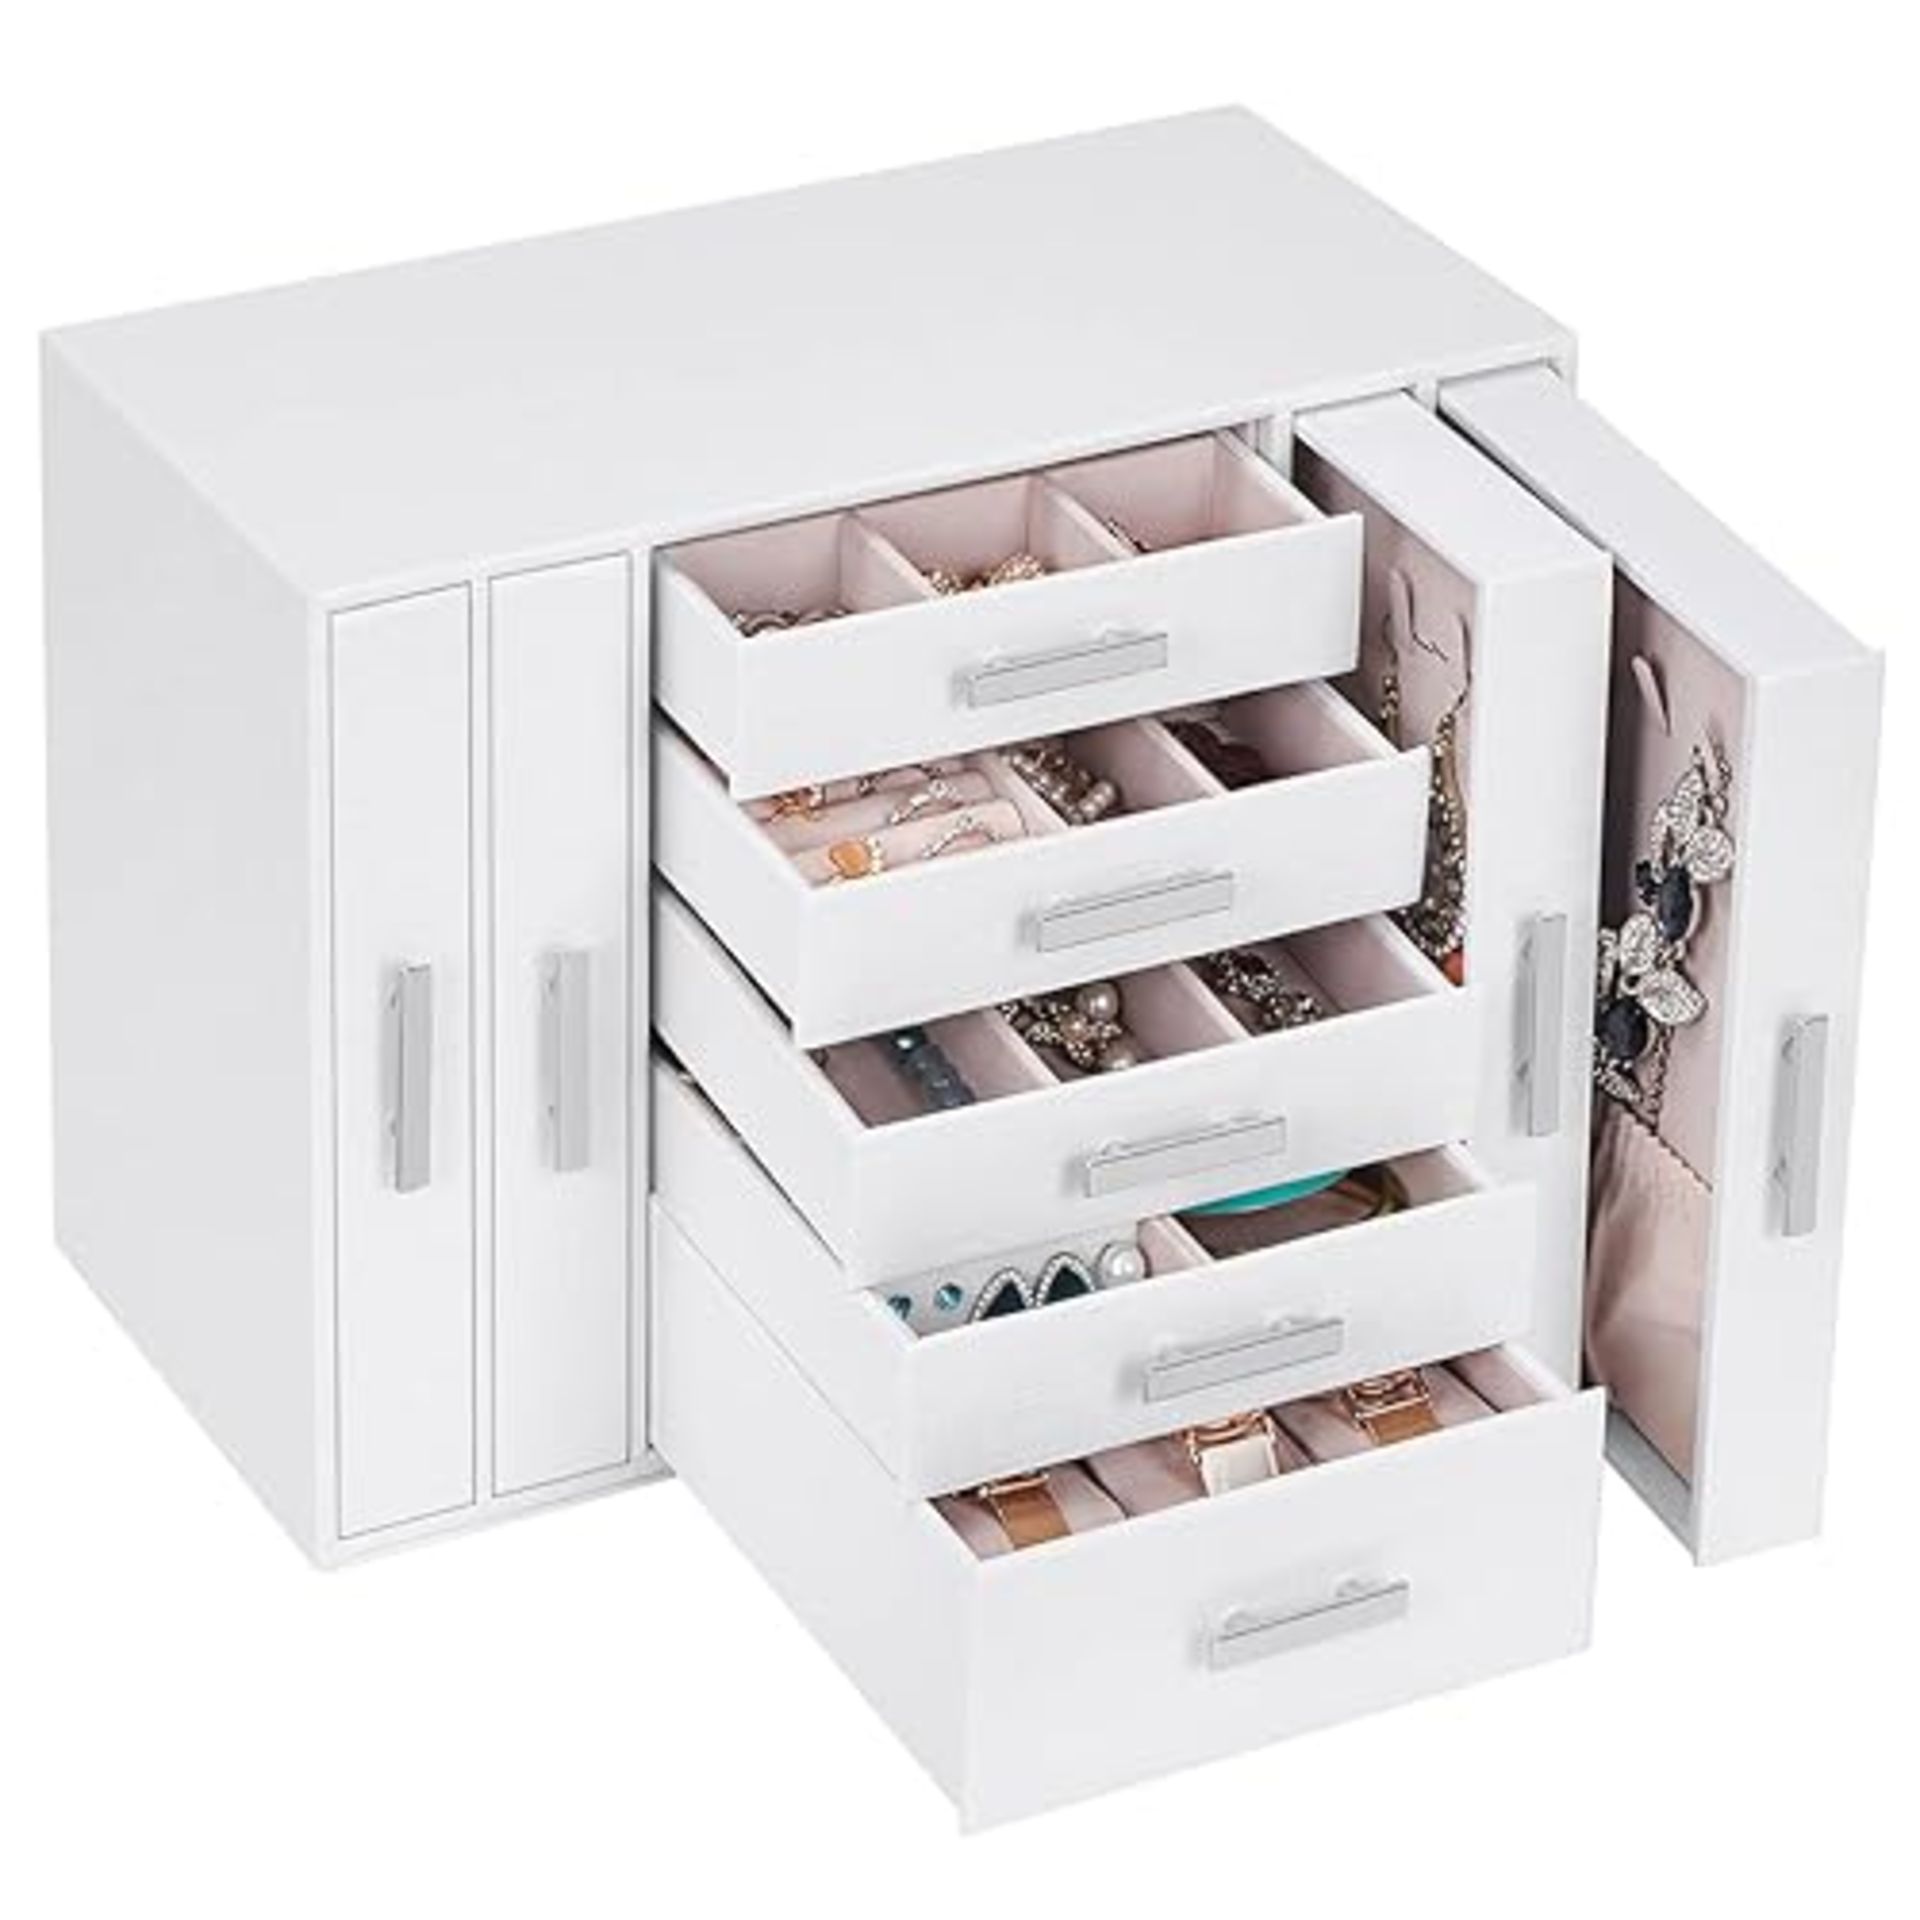 Anwbroad Jewellery Box Organiser Jewellery Case With 9 Drawers For Necklaces Earrings Rings Jewelle.